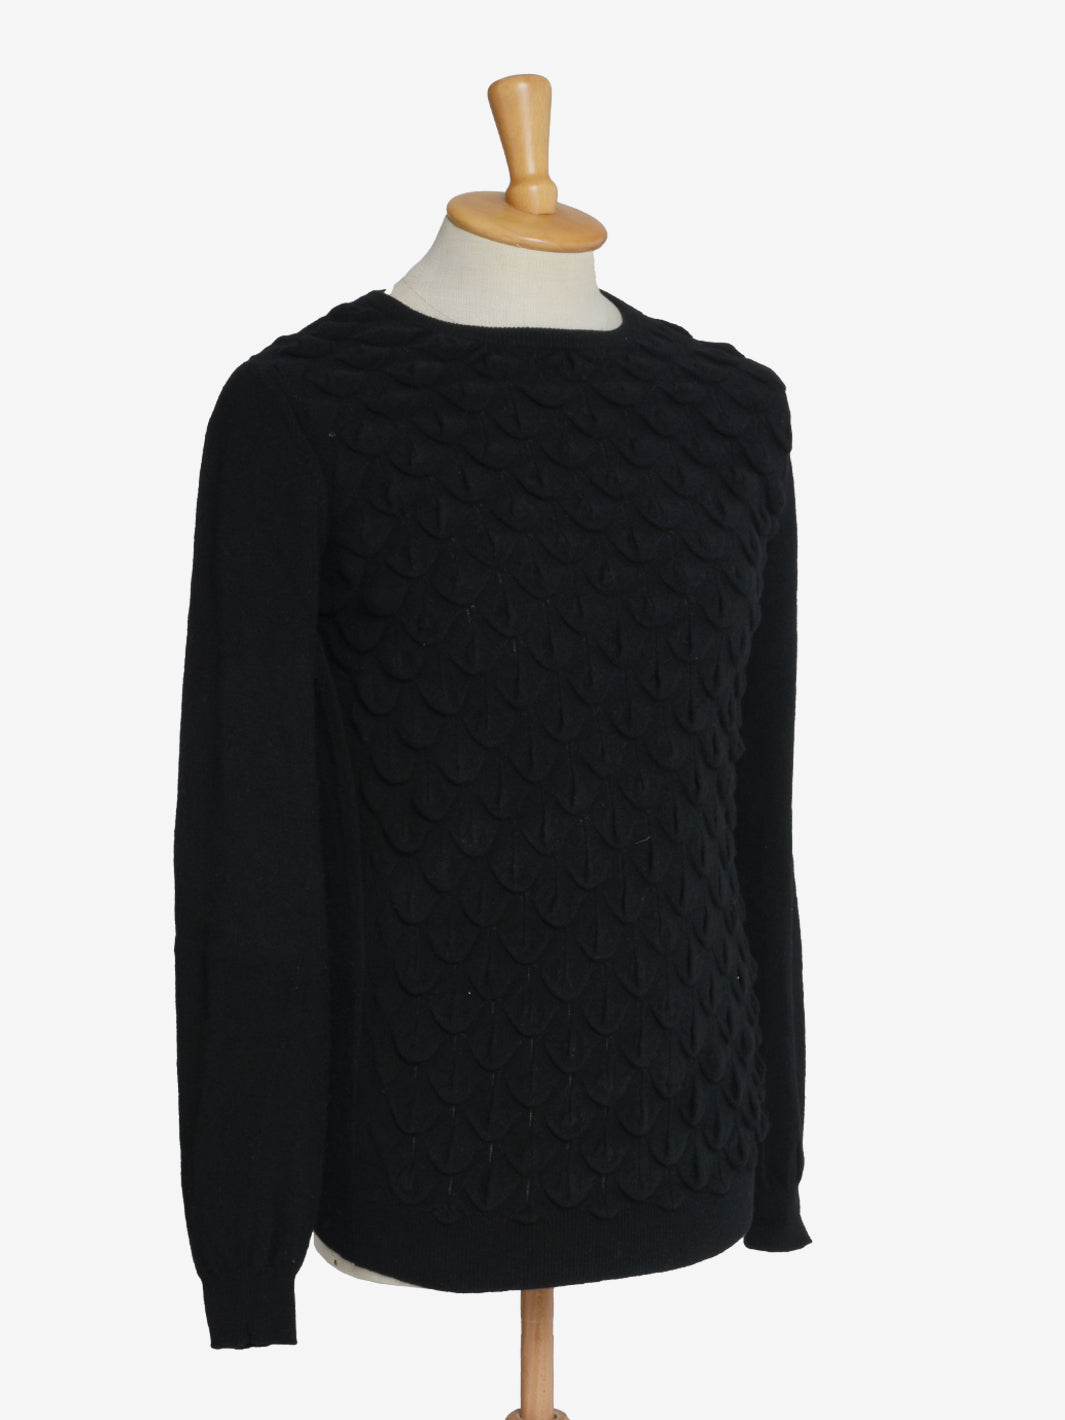 Les Homme Wool Sweater